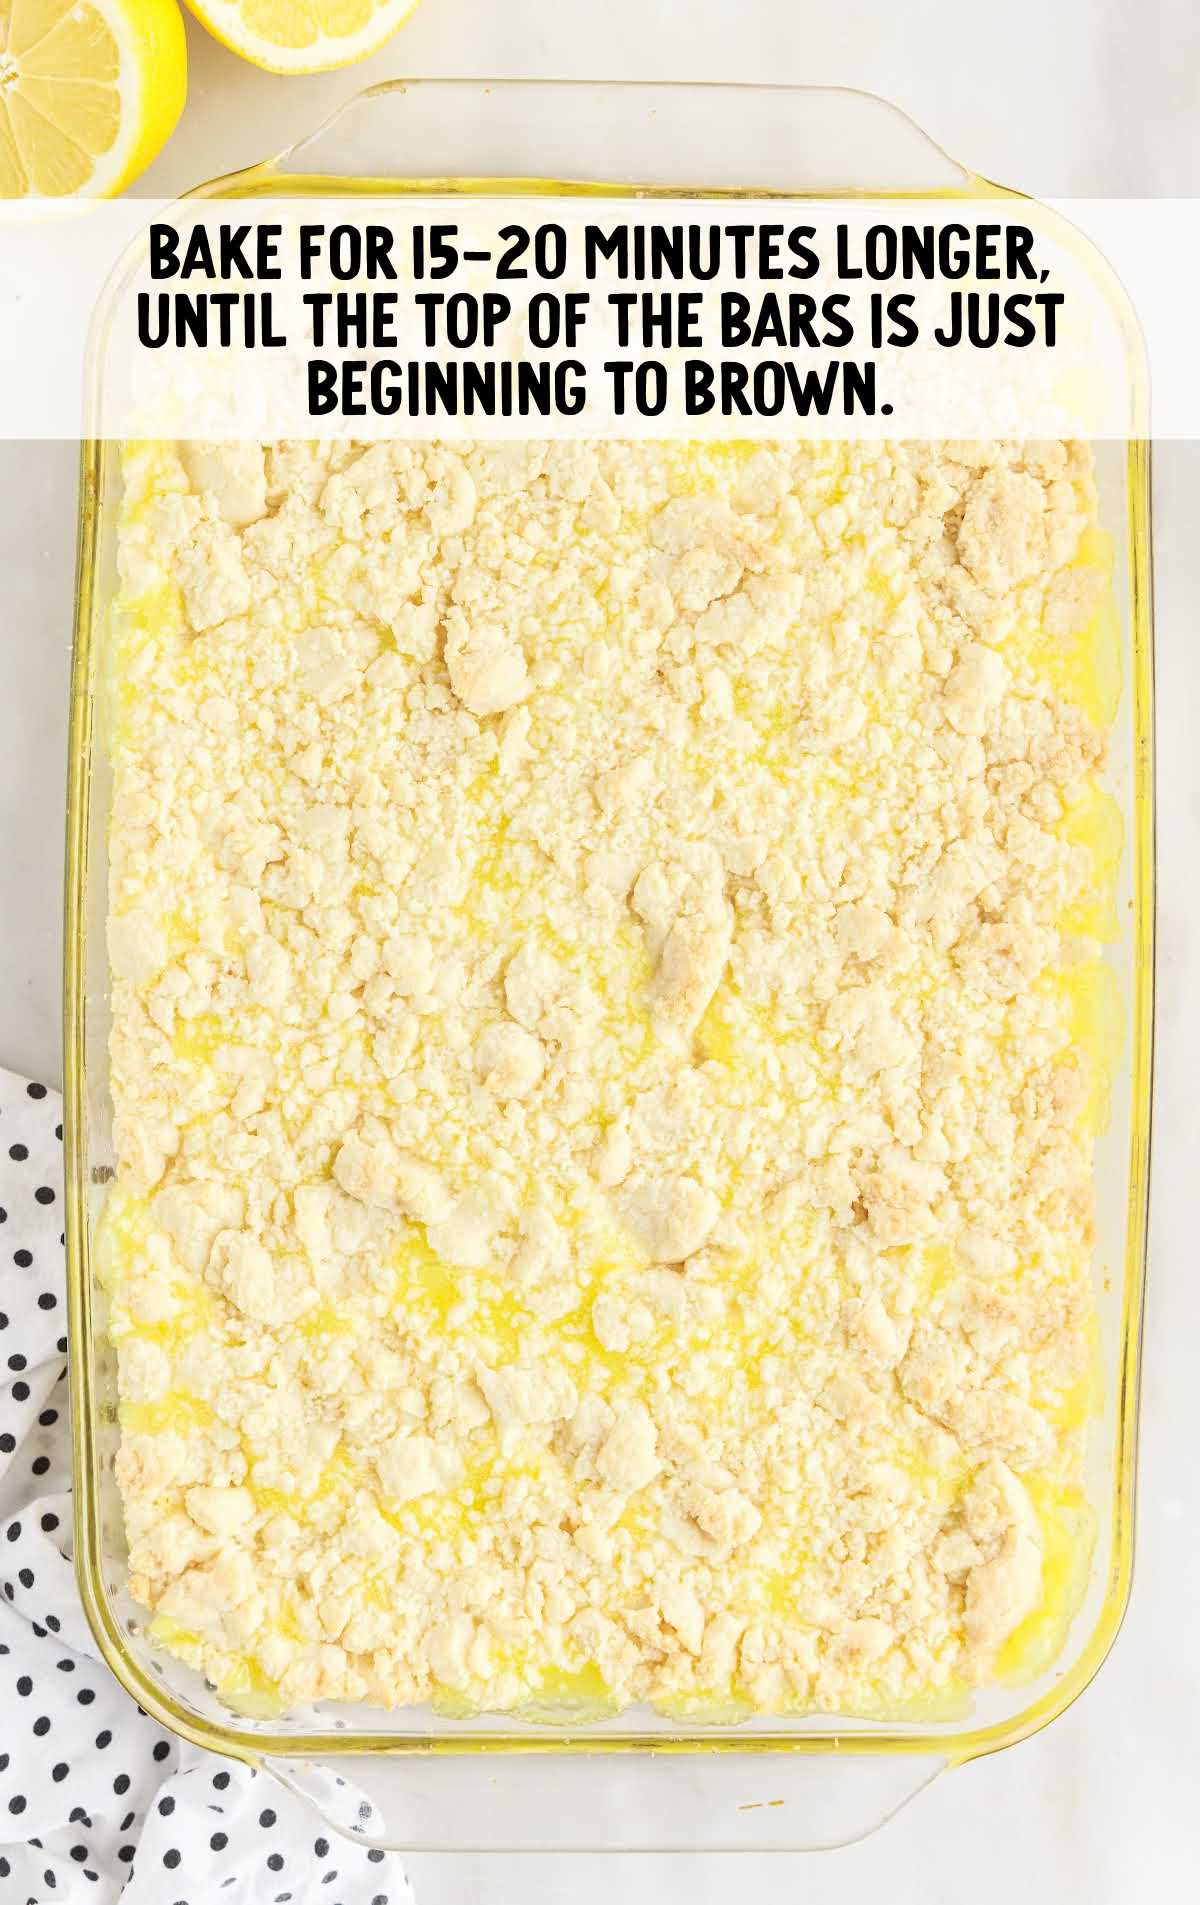 lemon pie filling with crumbs baked in a baking dish